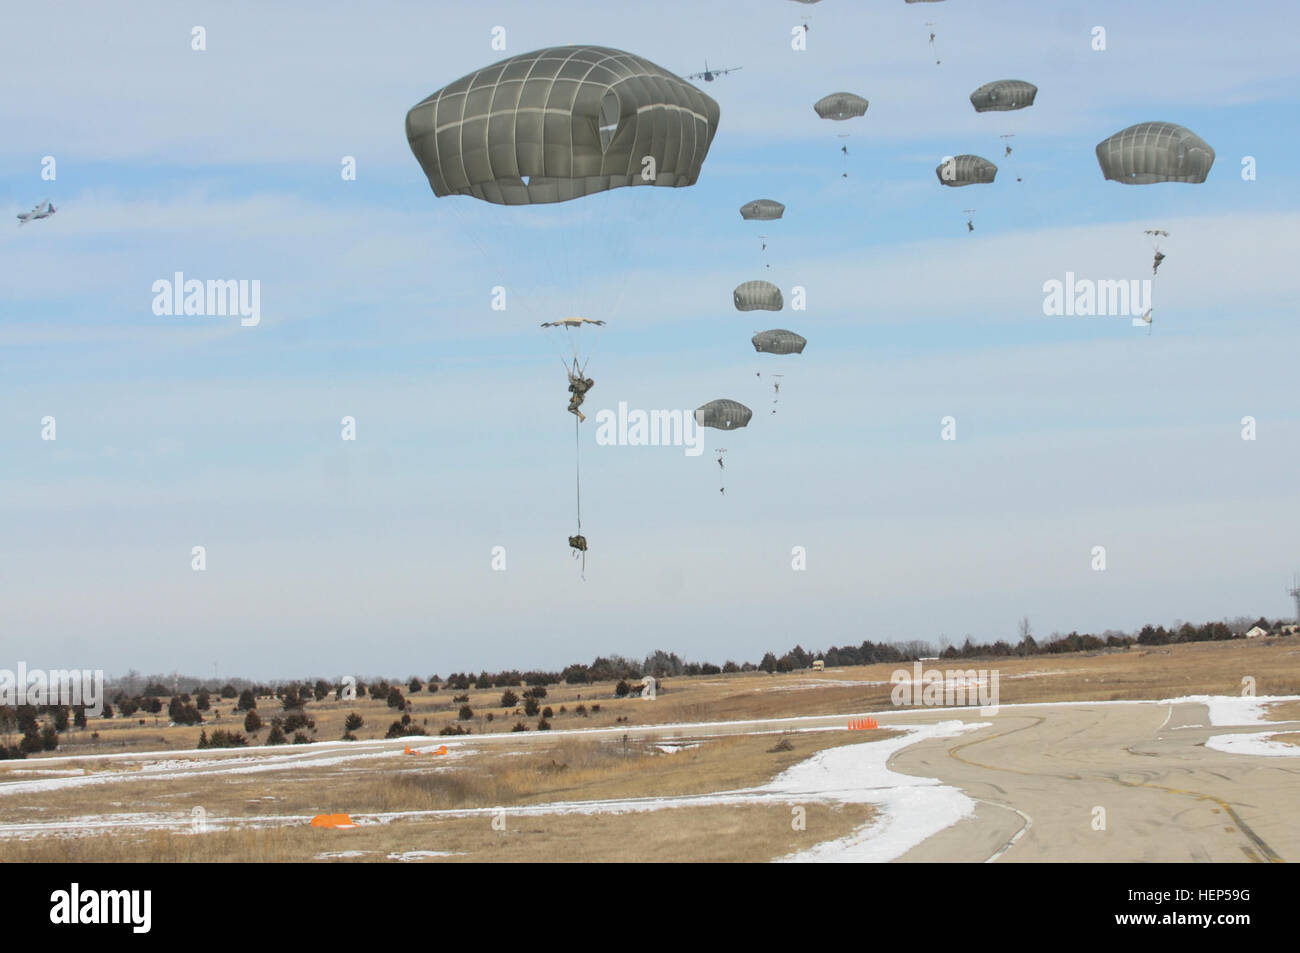 Paratroopers from the 82nd Airborne Division conduct an airfield seizure during Operation Steel Box 2 at Fort Leonard Wood, Missouri, Feb. 23, 2015. The operation validated the Brigade’s chemical and biological weapons entry team’s proficiency in mission planning, preparation, and execution. (82nd Airborne Division photo by Sgt. Eliverto V. Larios/Released) Falcons jump into Fort Leonard Wood, conduct chemical training 150223-A-ZK259-410 Stock Photo